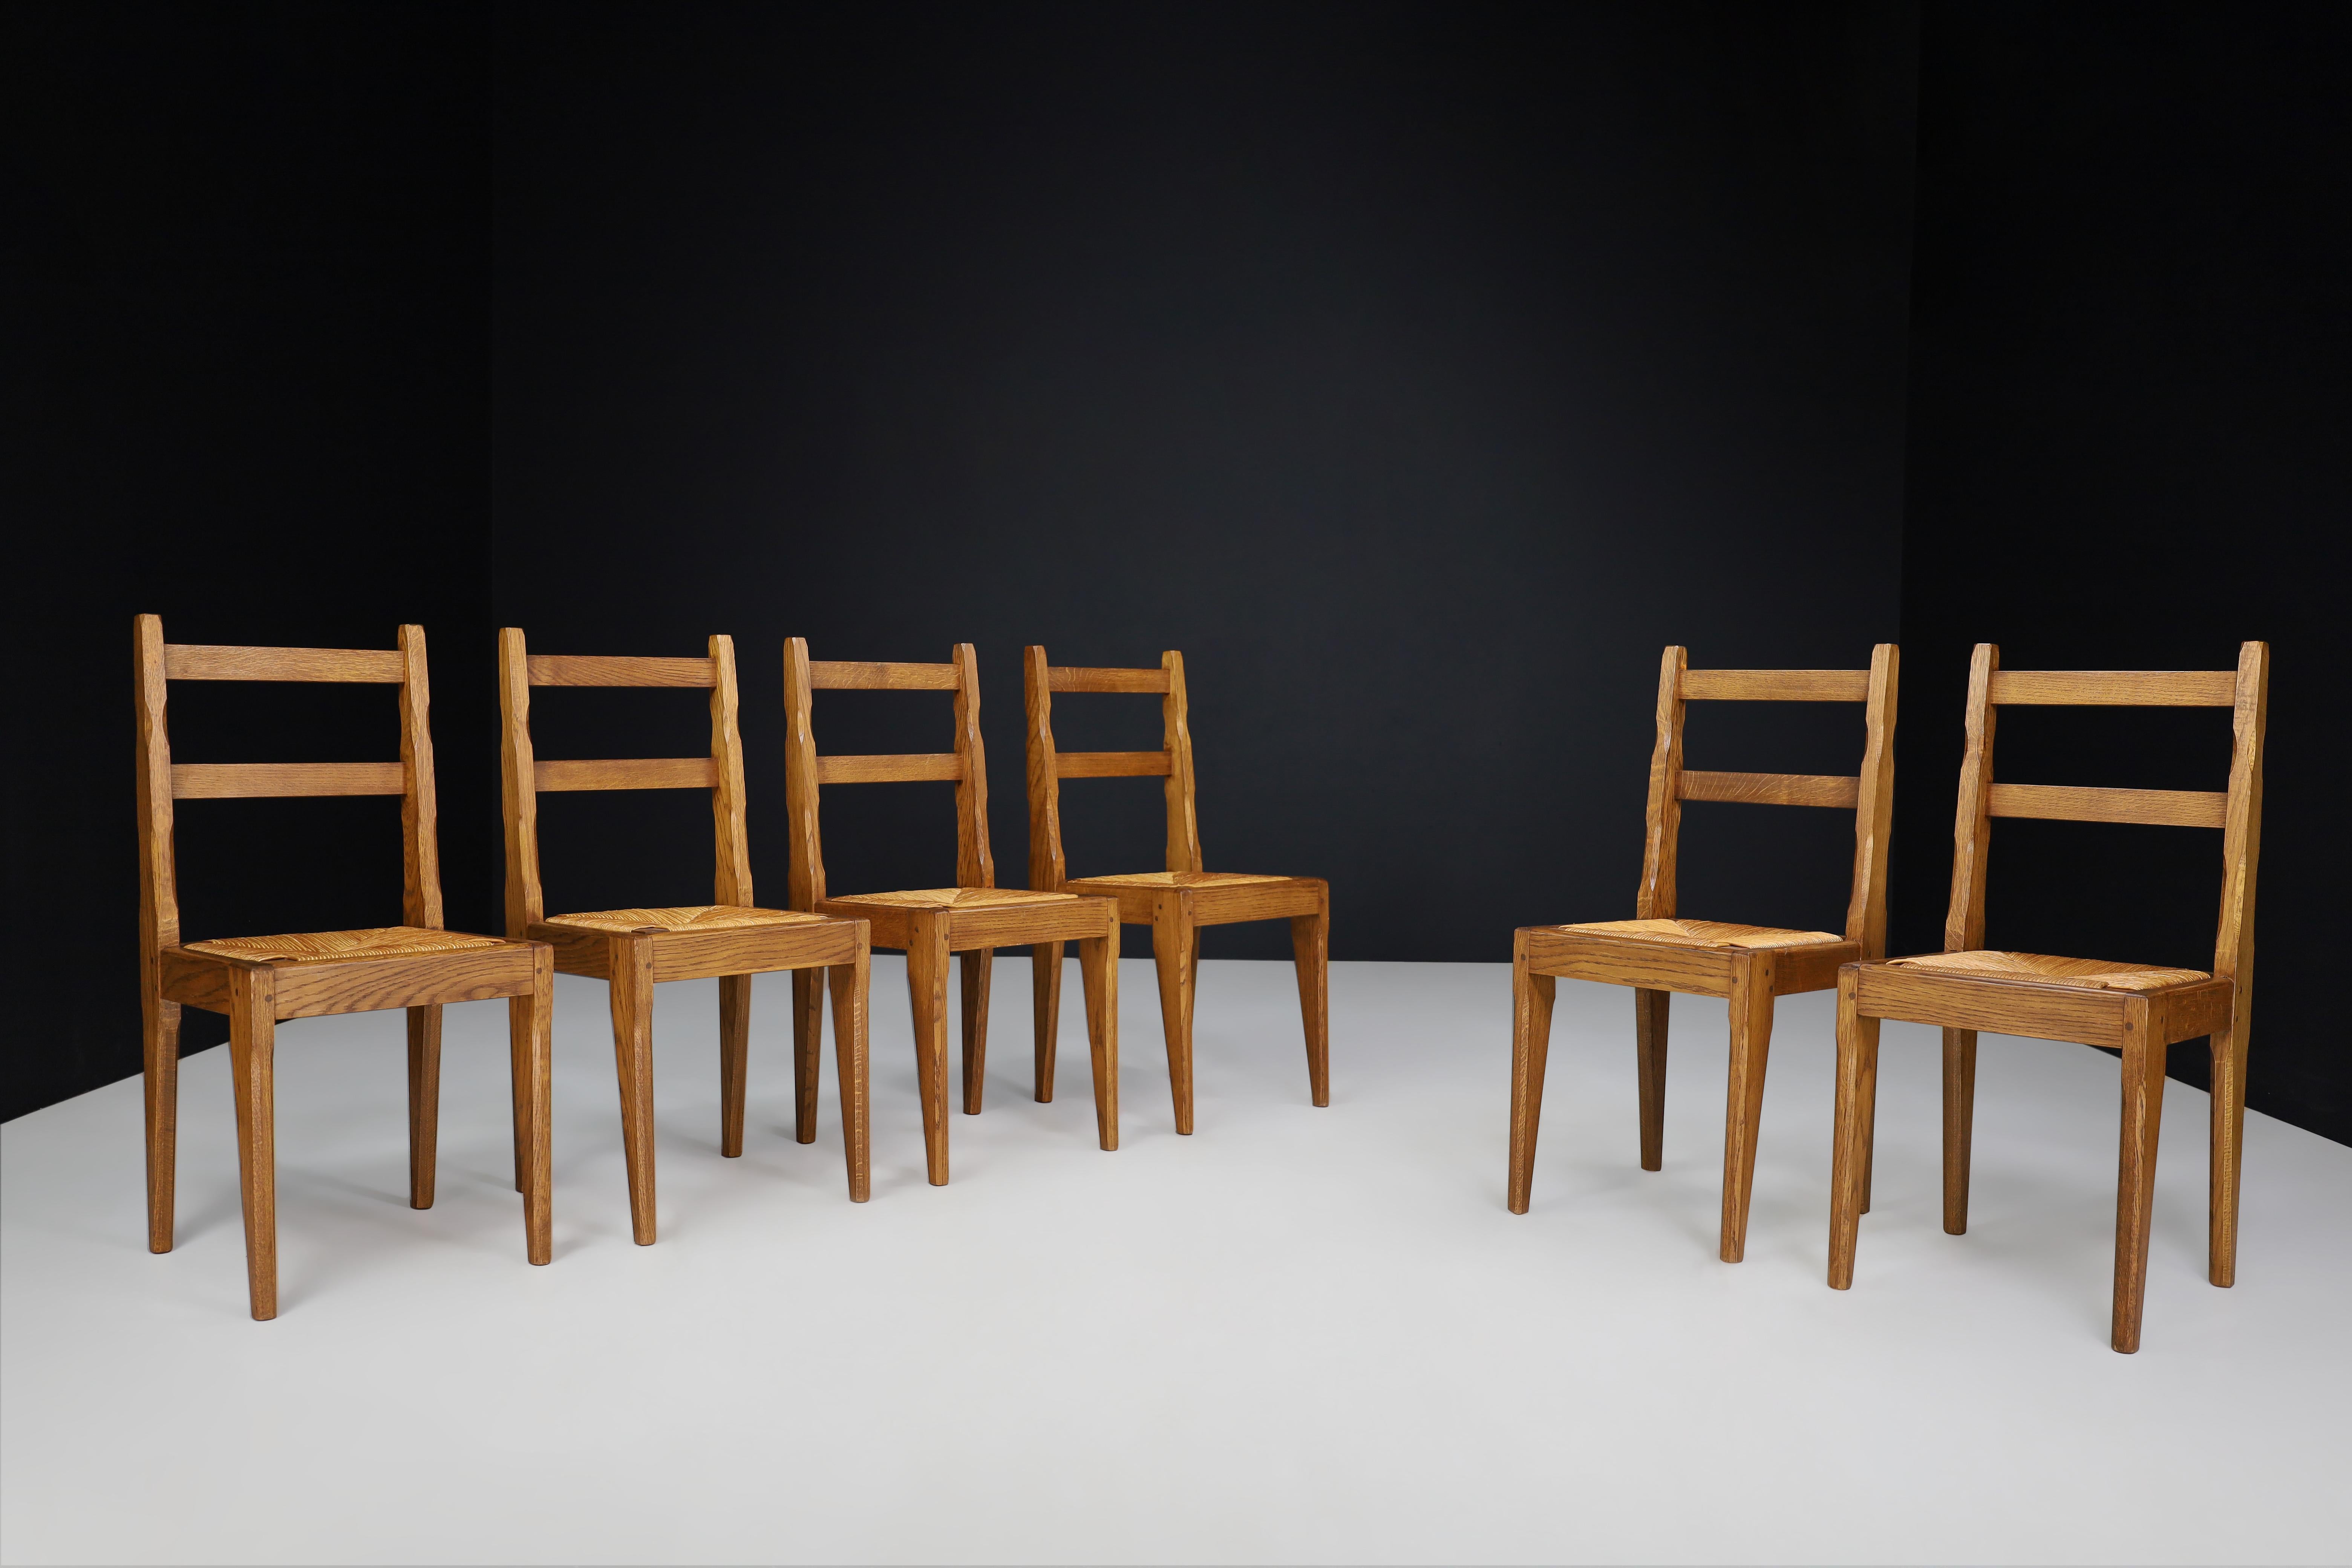 Dinning room chairs in oak and rush made in France 1960

This set of six dining room chairs from France in the 1960s is made of sturdy oakwood and rush. They are in excellent condition and have a warm color that will add elegance to any dining